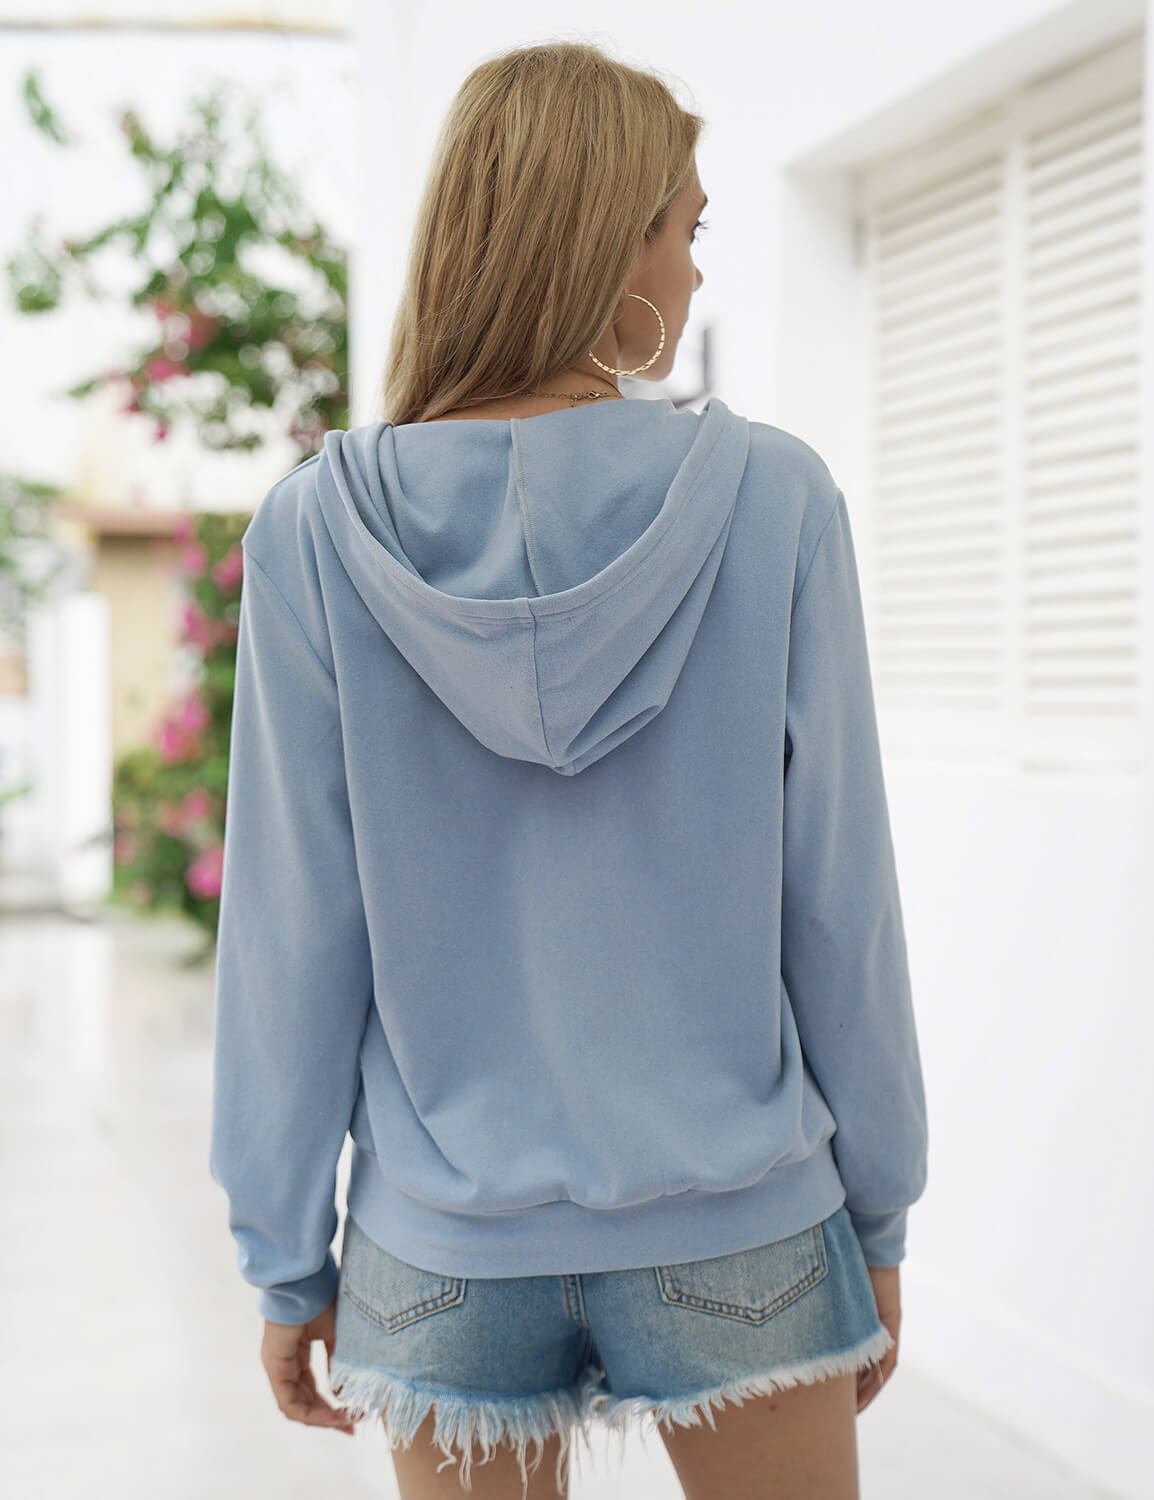 Blooming Jelly_Chill Out Full-Zipper Hoodie Jacket_Blue_303147_03_Sporty Casual Women Daily Wear_Tops_Hoodie